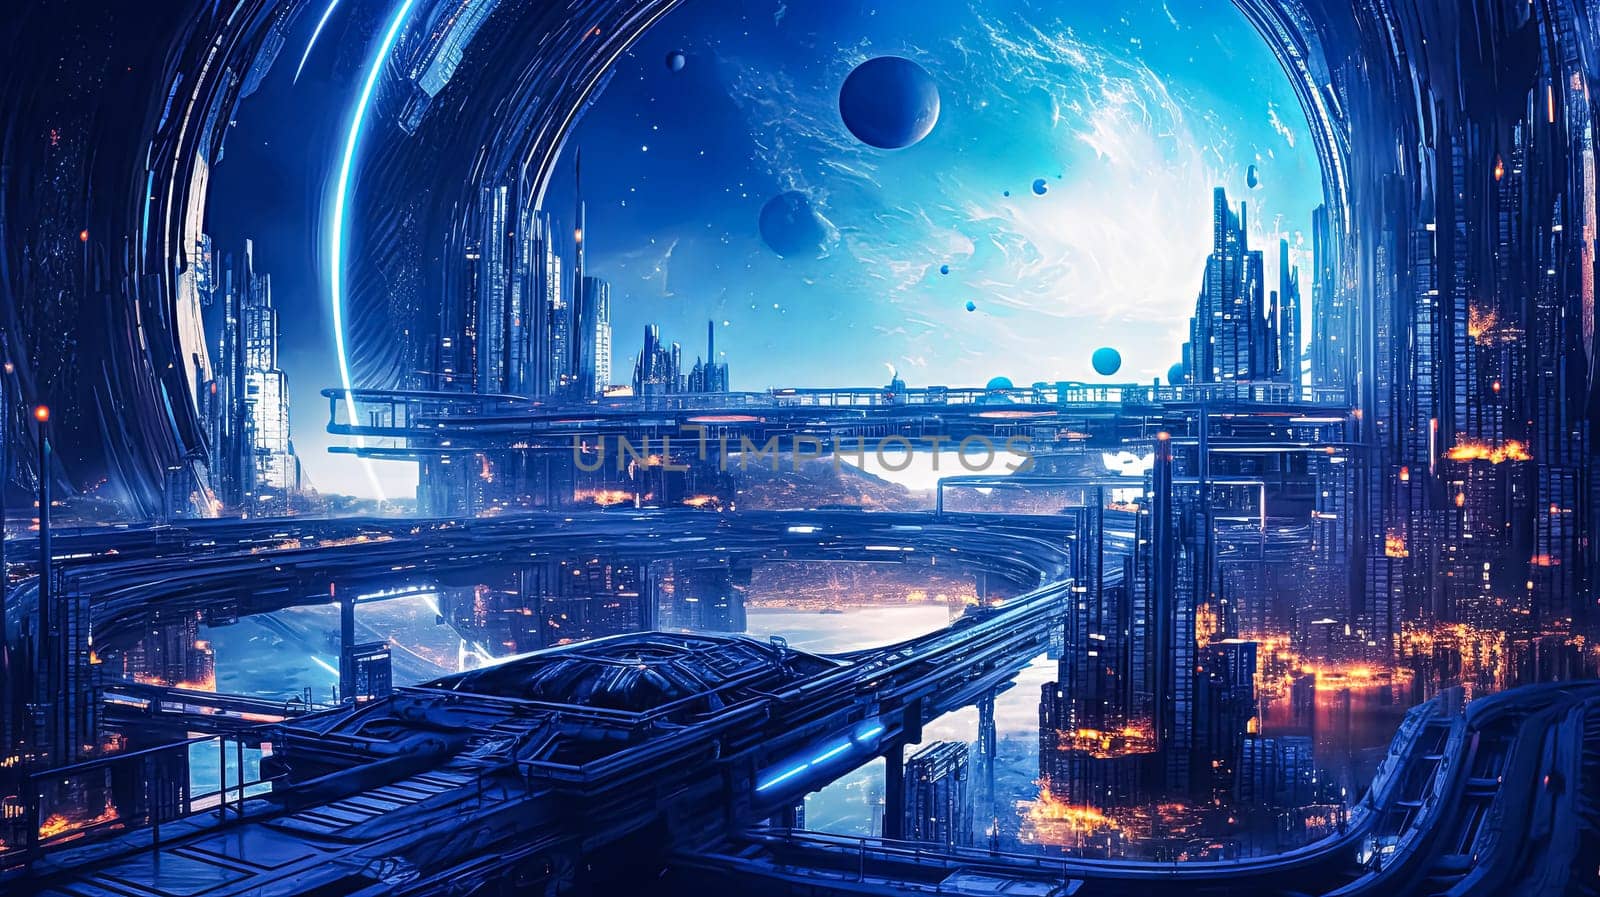 A blue and white space with a large planet in the background. There are many buildings in the space, and a bridge is visible. Scene is futuristic and otherworldly